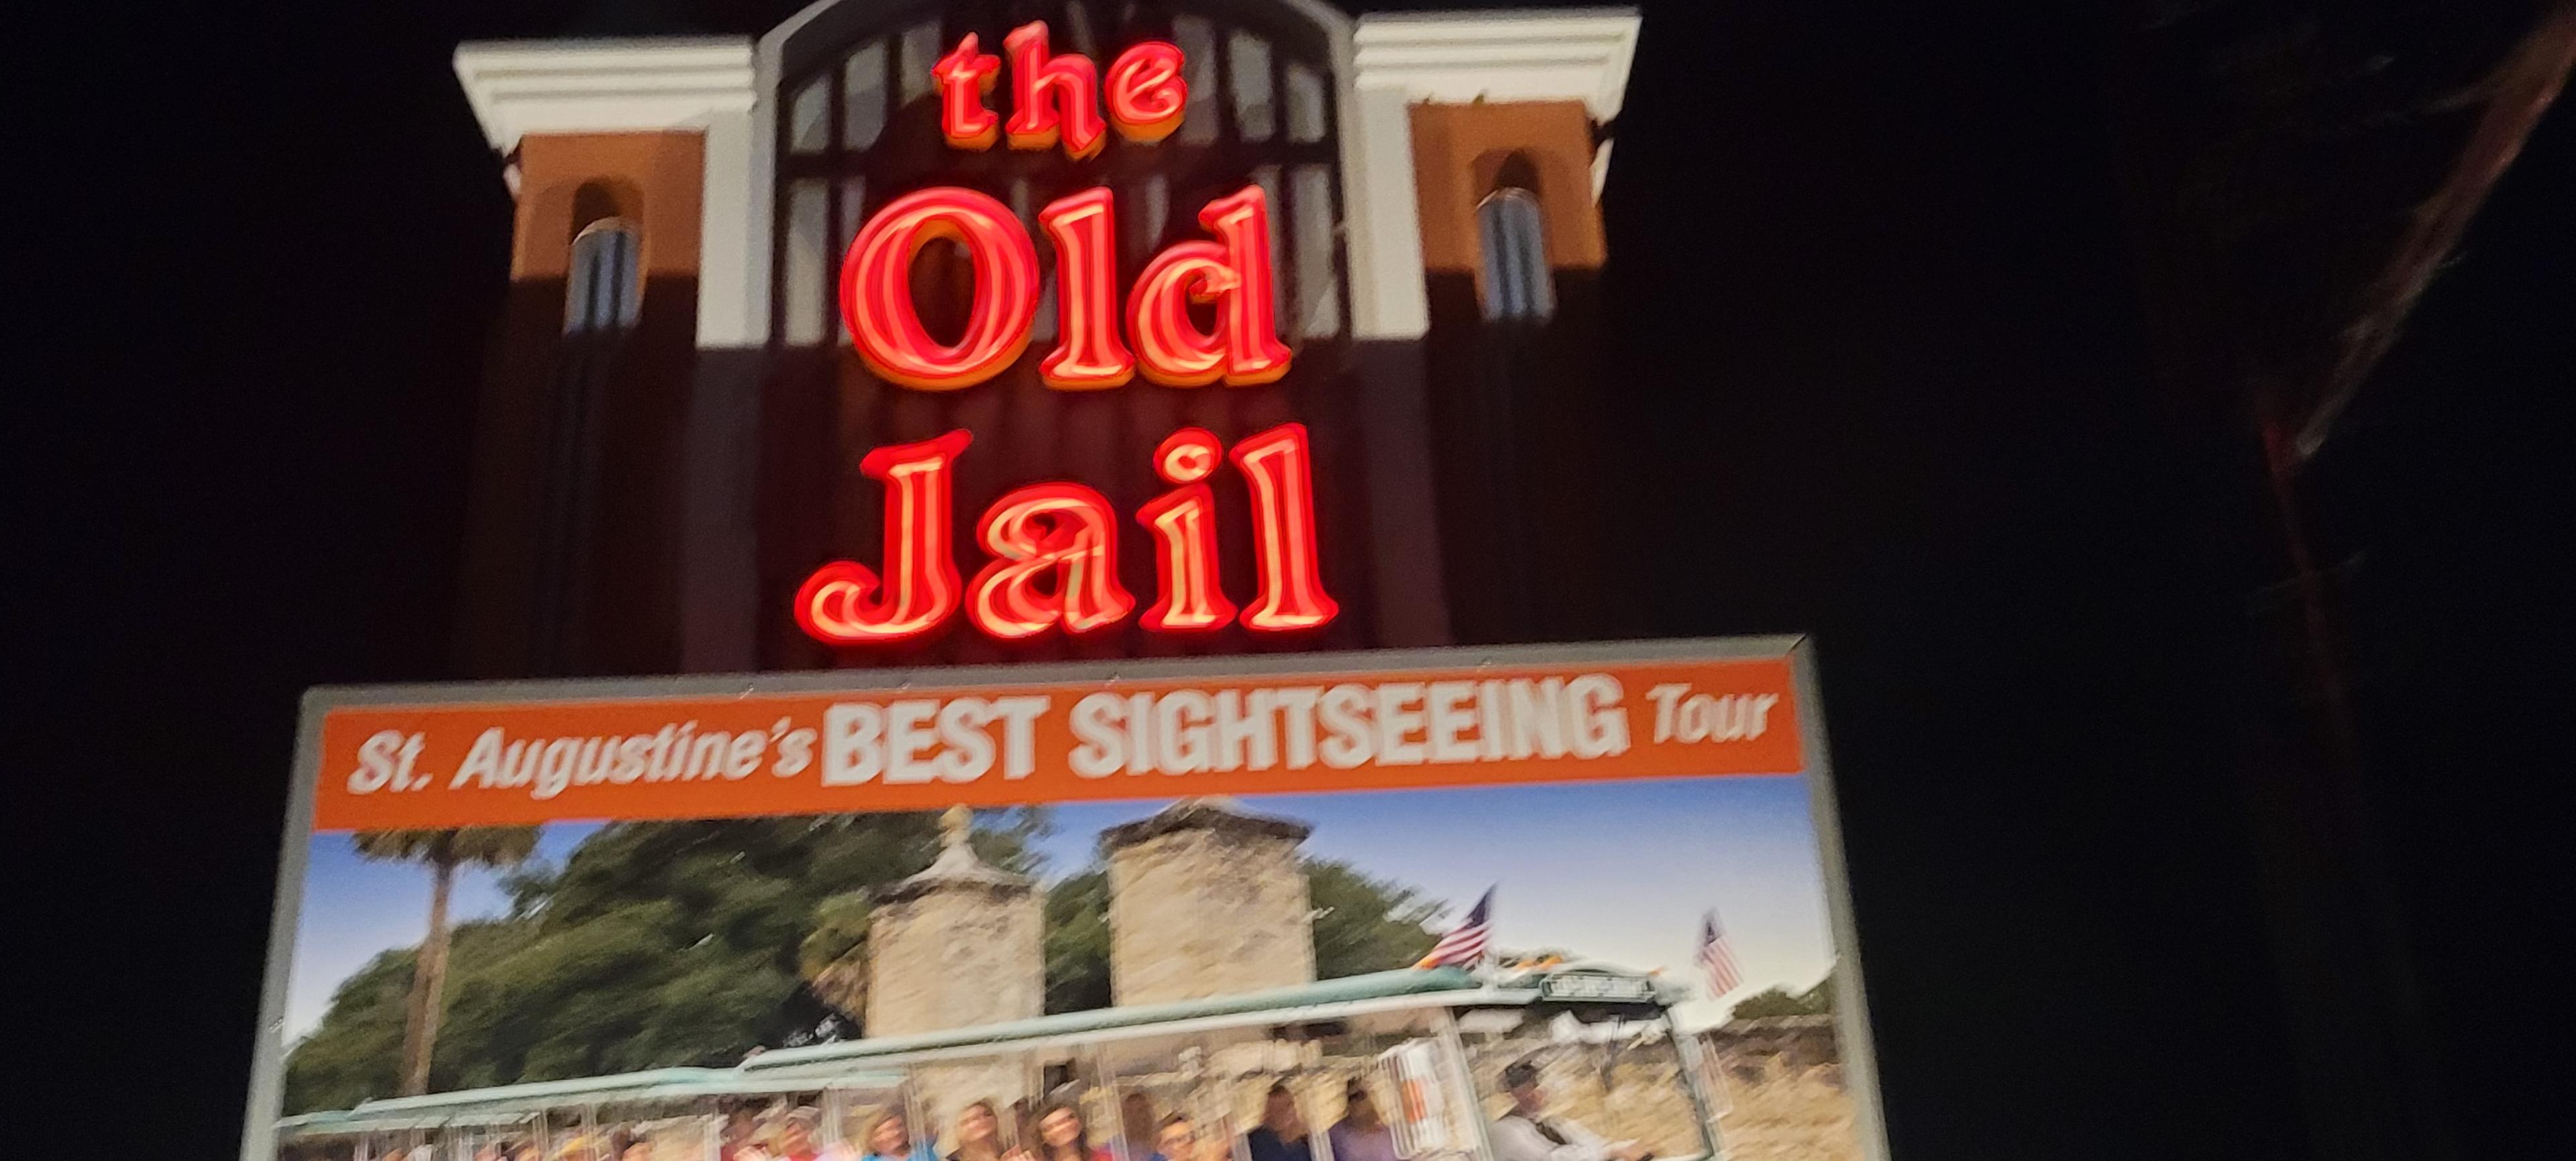 Escape to the old historic jail in St. Augustine